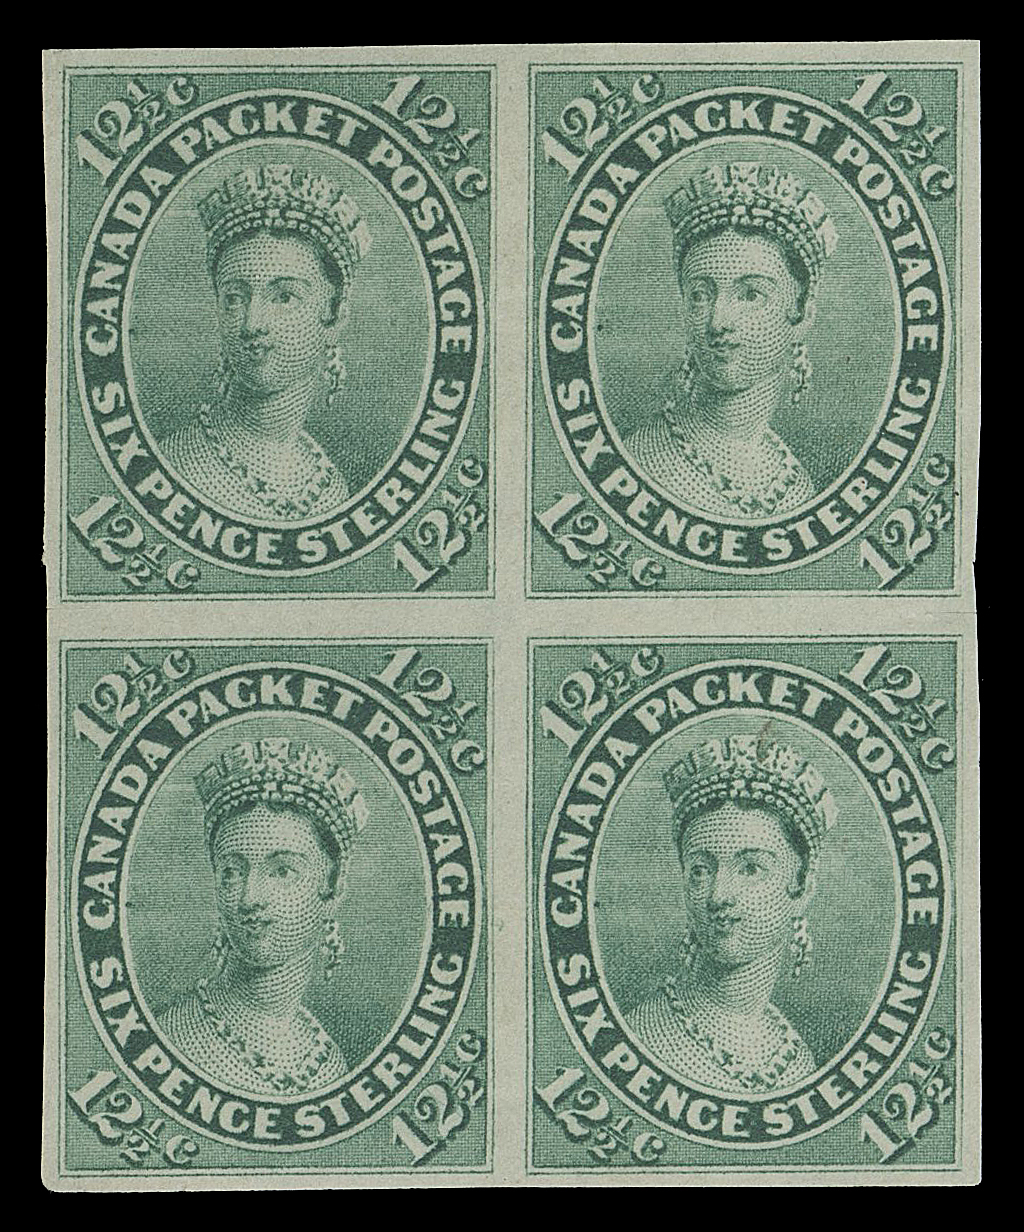 SEVEN AND ONE HALF PENCE AND TWELVE AND ONE HALF CENTS  18b,A very scarce, choice mint block with the characteristic colour and impression associated with the imperforates on wove paper; small scissor cuts at both ends entirely confined to margin between horizontal pairs. Large margins all around unlike many of the known multiples, ungummed as normally encountered; an attractive block, VF

Expertization: 1987 Greene Foundation certificate (identified as old CS number 16)

Provenance: General Robert Gill, Robson Lowe Ltd, October 1965; Lot 69
Art Leggett Cents Issue Exhibit Collection (private sale)
The "Lindemann" Collection (private treaty, circa. 1997)